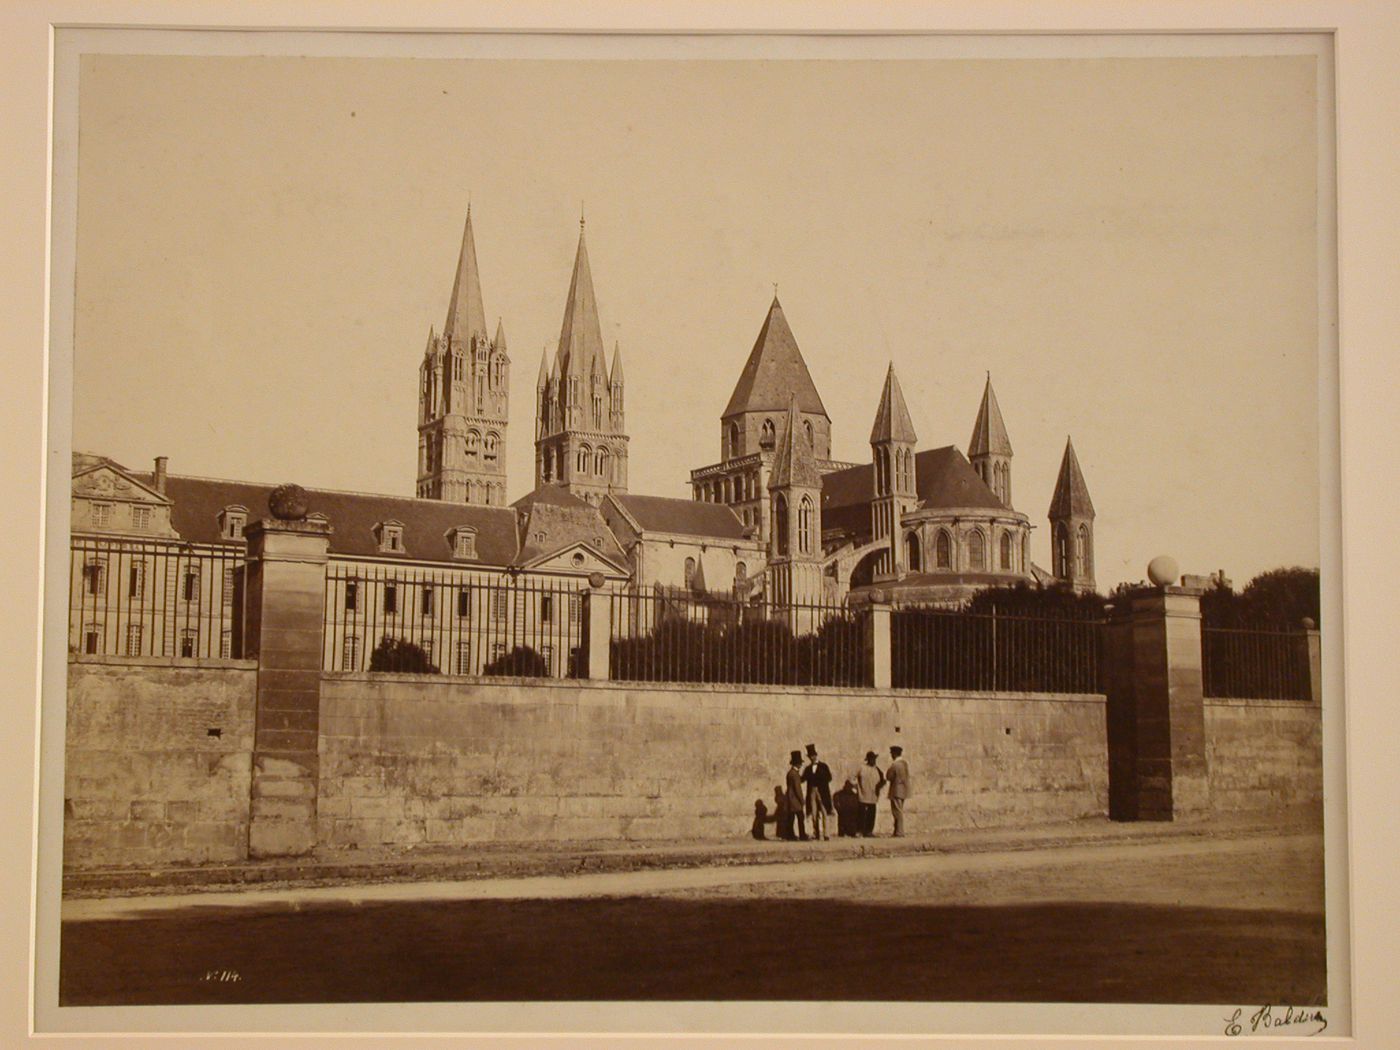 General view from the southeast of Saint-Étienne, with spires visible behind 17th palace of the Abbot at left, Caen, France